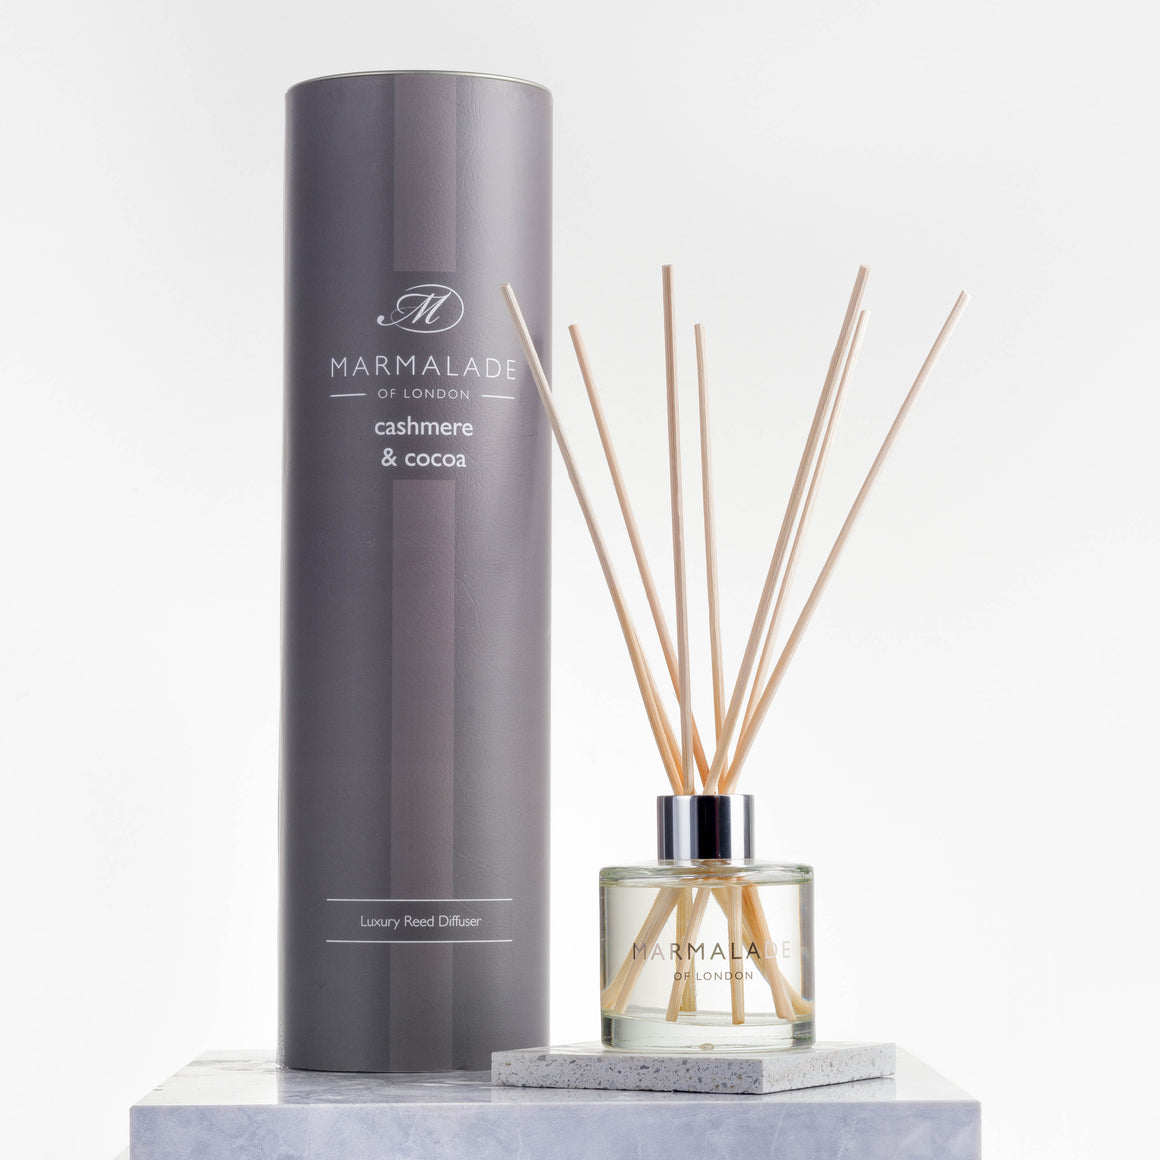 Marmalade of London Cashmere & Cocoa Diffuser with grey packaging